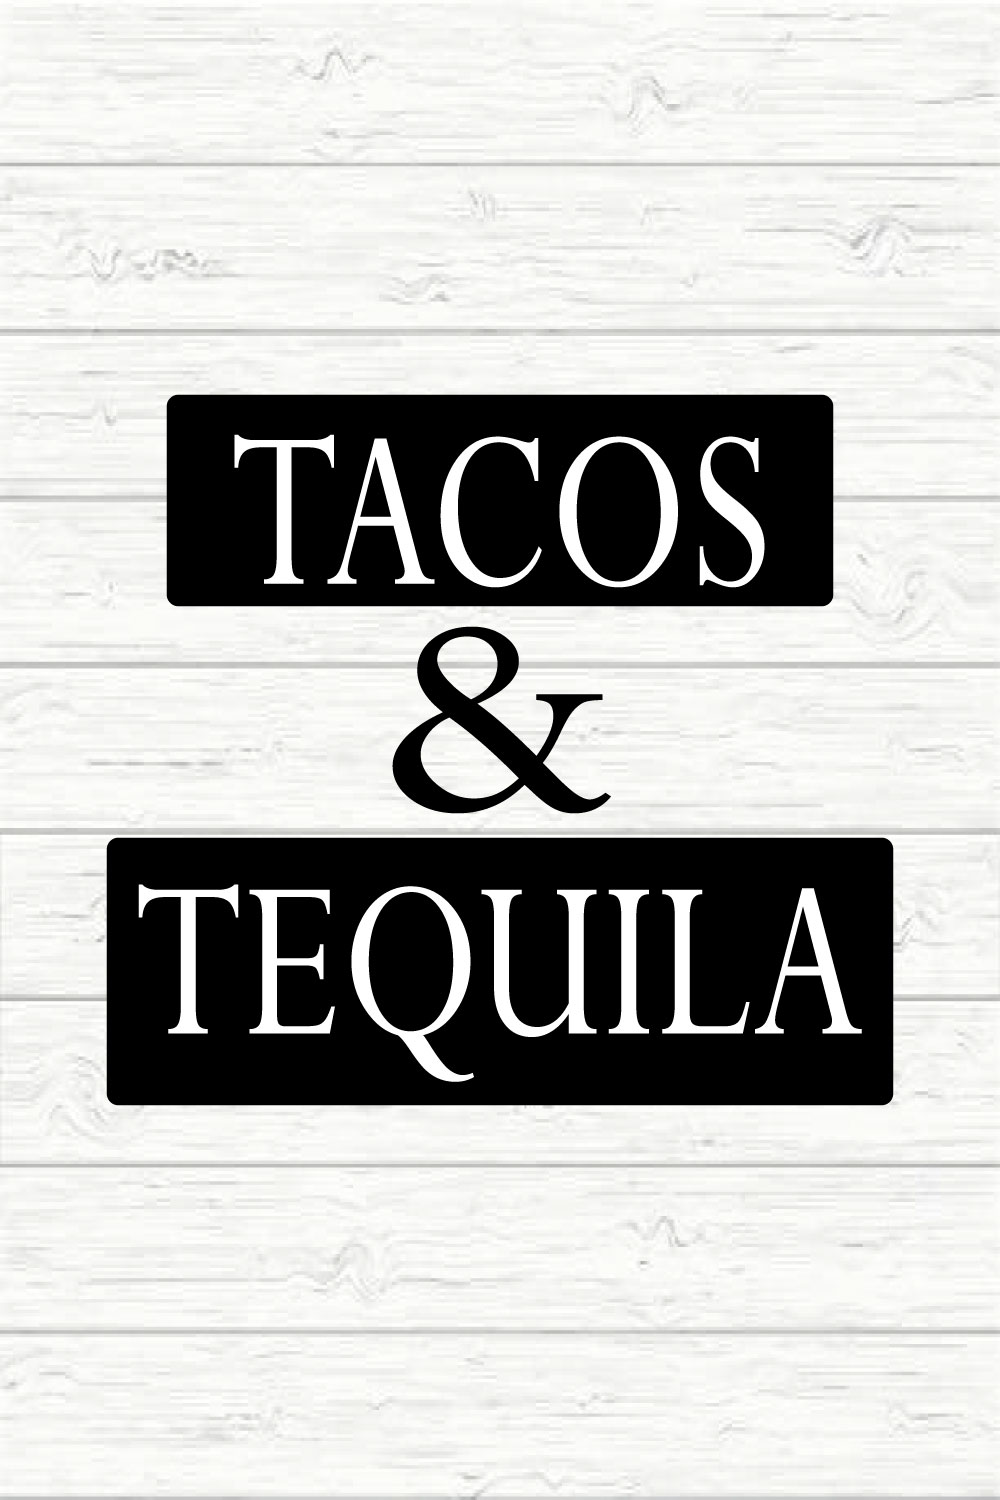 Tacos & Tequila pinterest preview image.